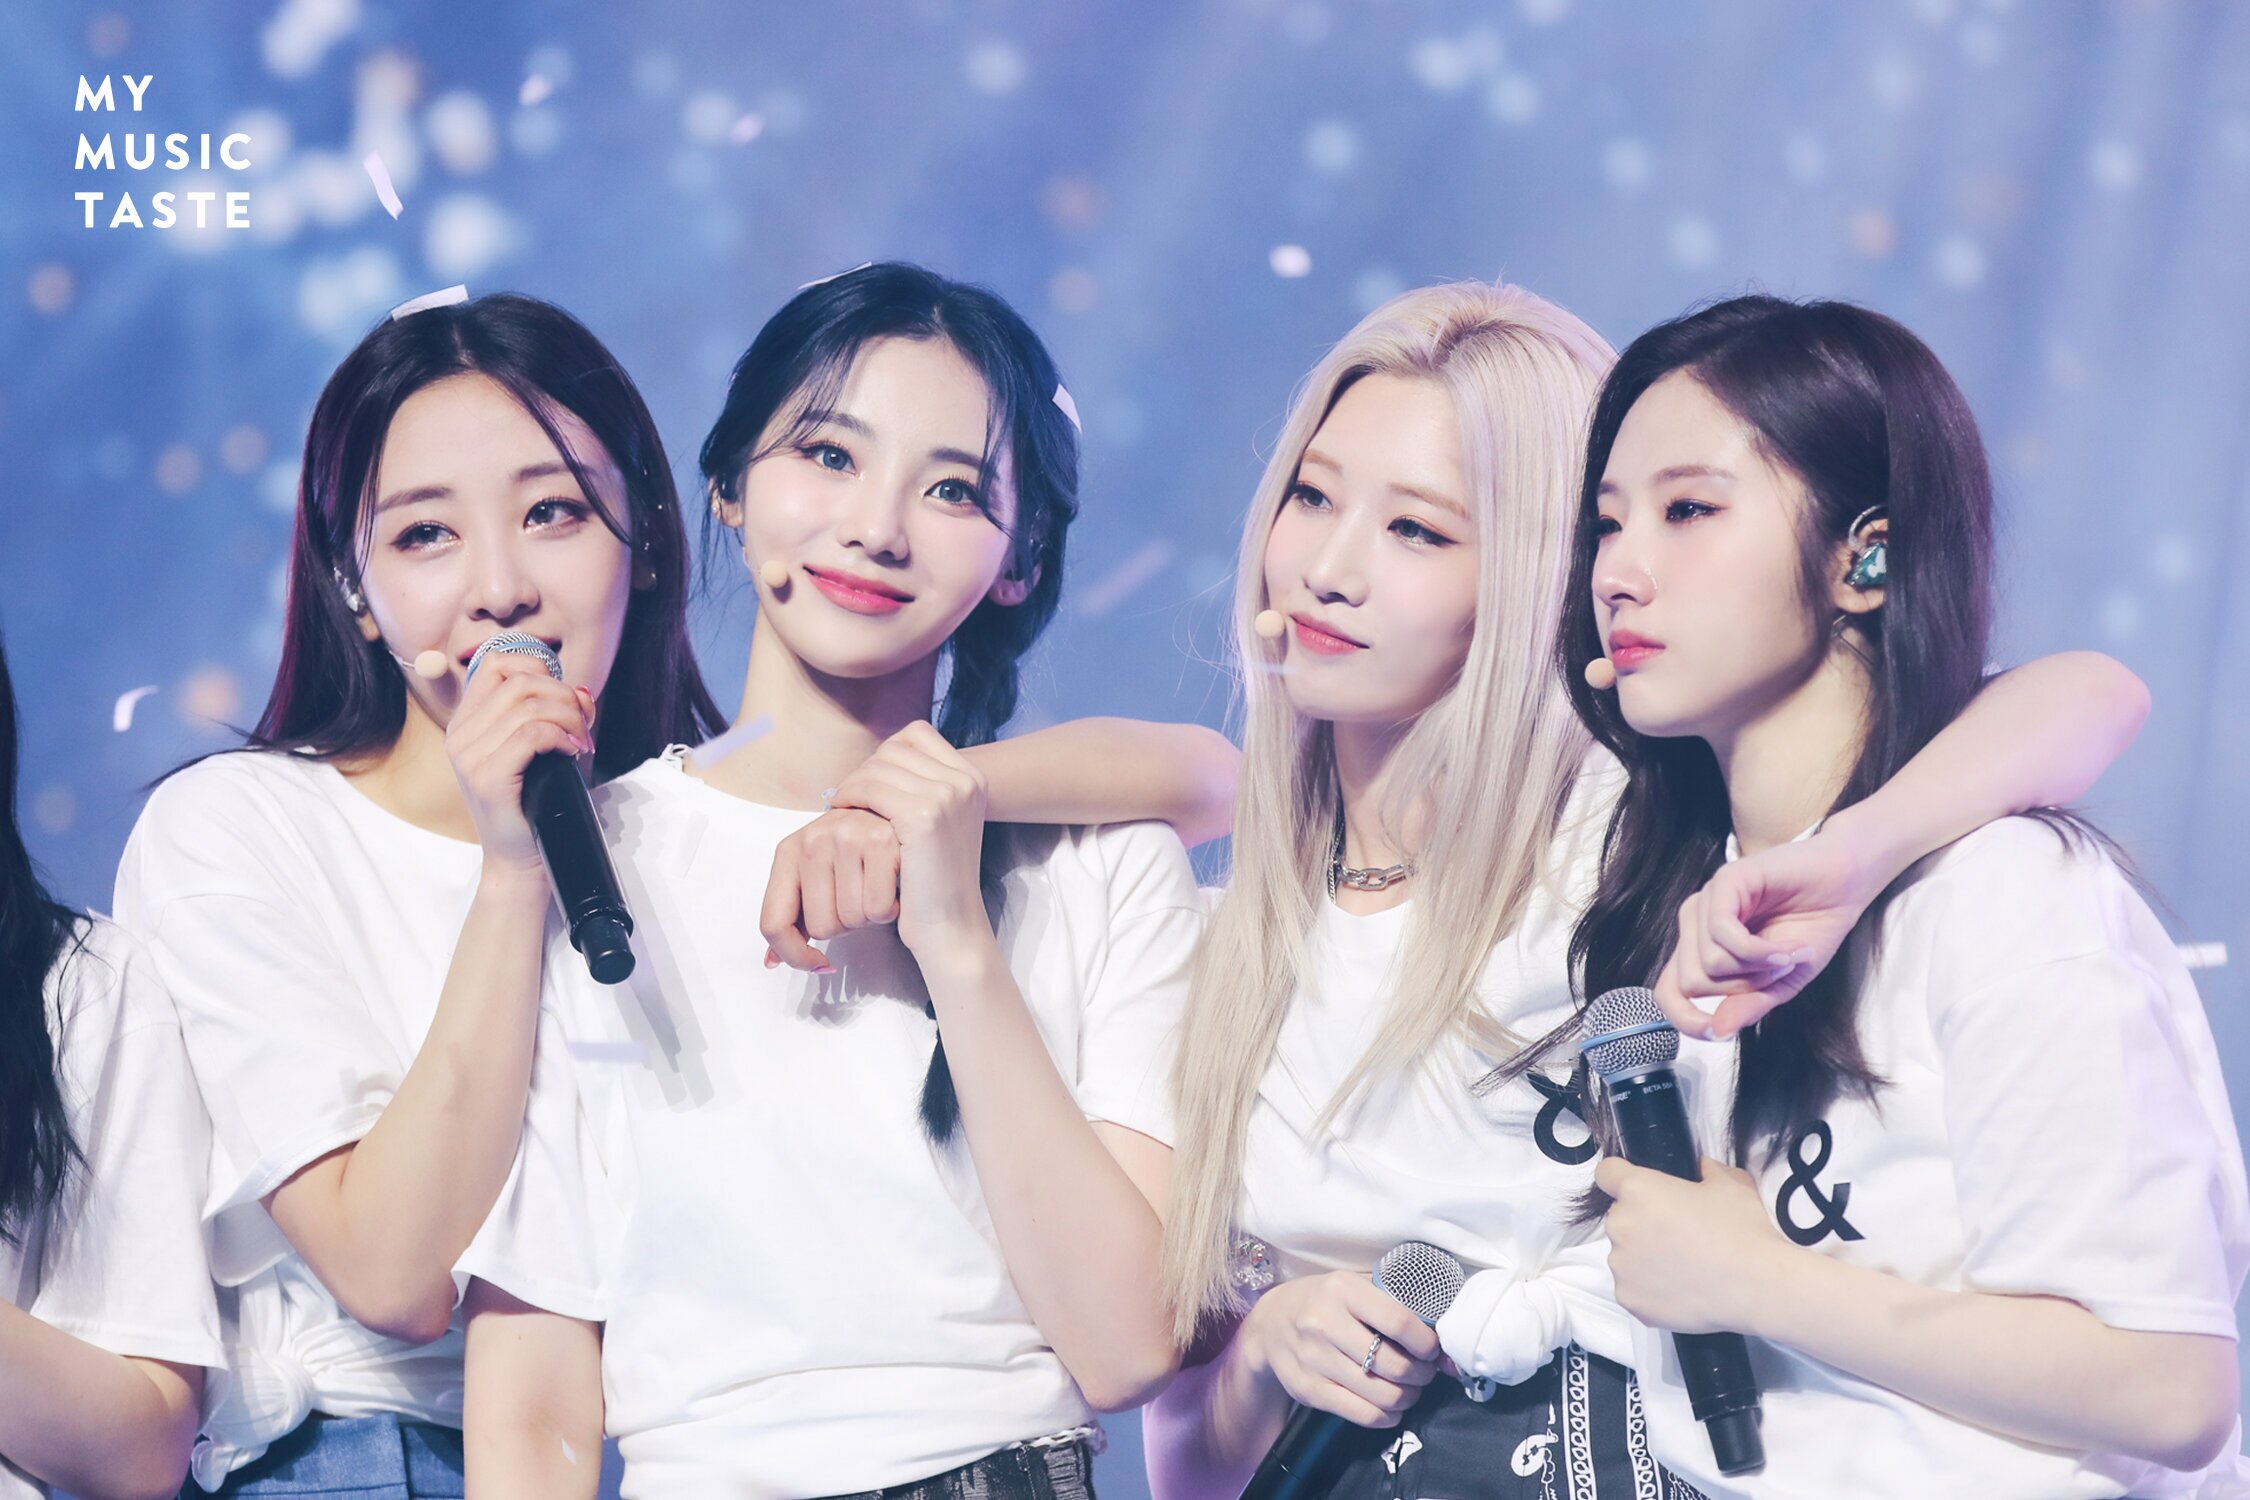 July 11 21 Mymusictaste Twitter Update Loona On Wave Loopdtheworld Concert Photos Kpopping